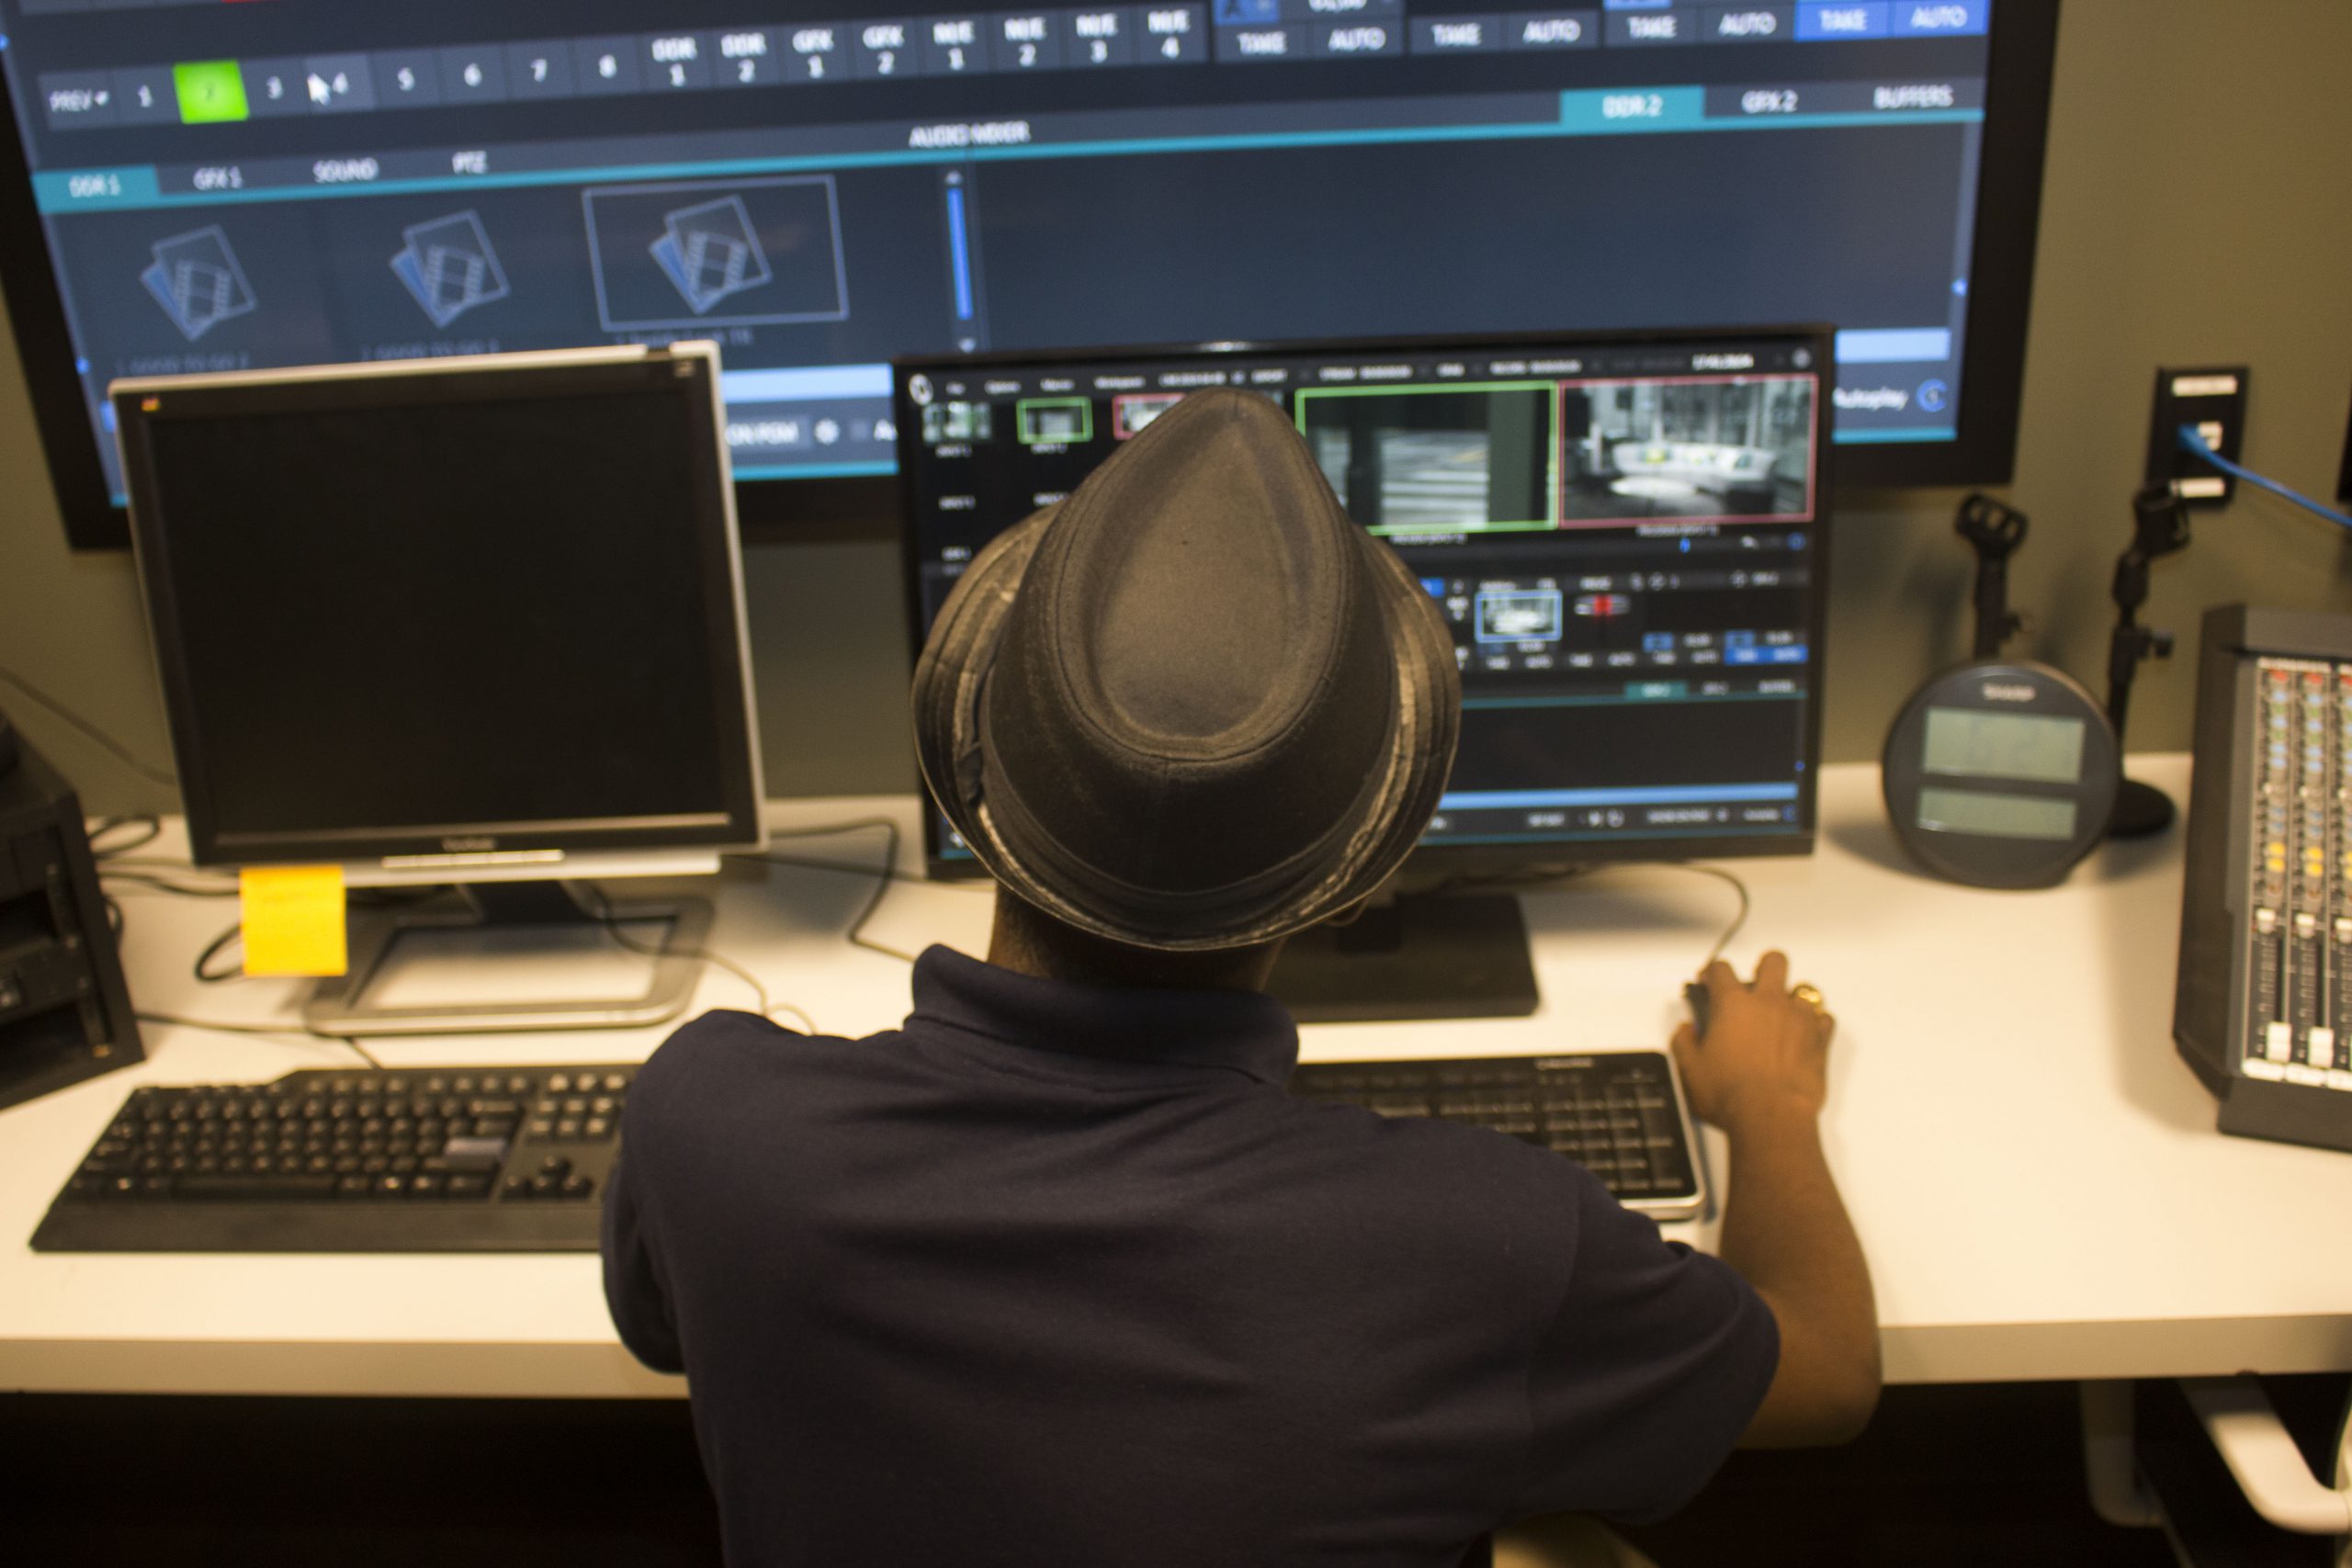 A person photographed from behind with a black hat and black shirt editing in the Center for Media Innovation's control room.